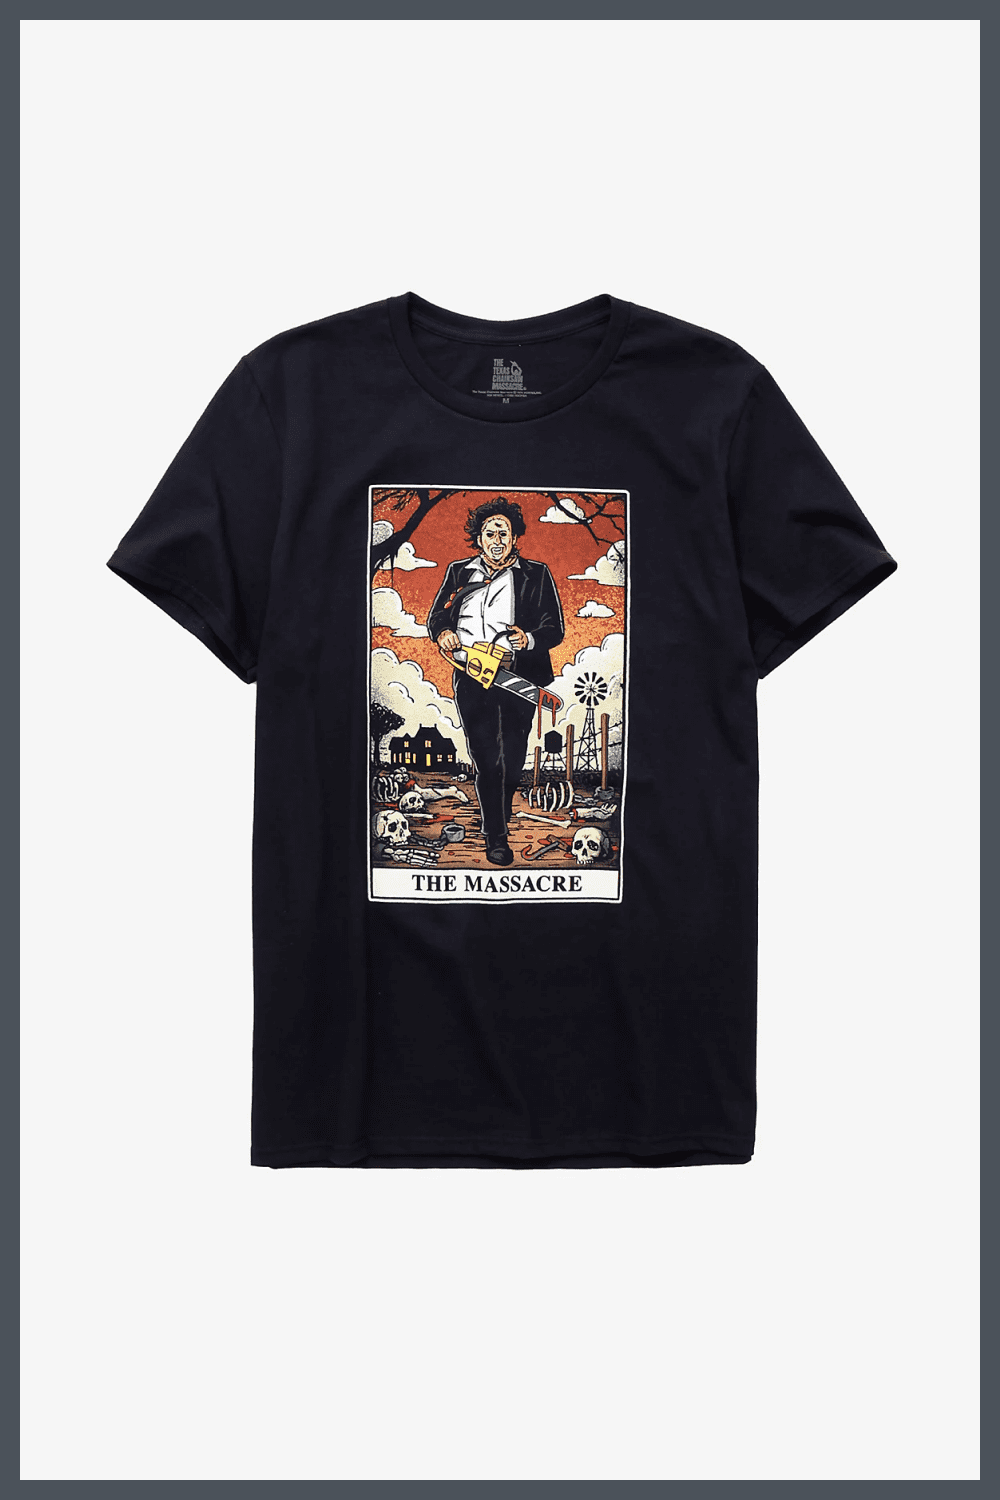 This black tee features Leatherface from The Texas Chainsaw Massacre reimagined as a tarot card entitled 